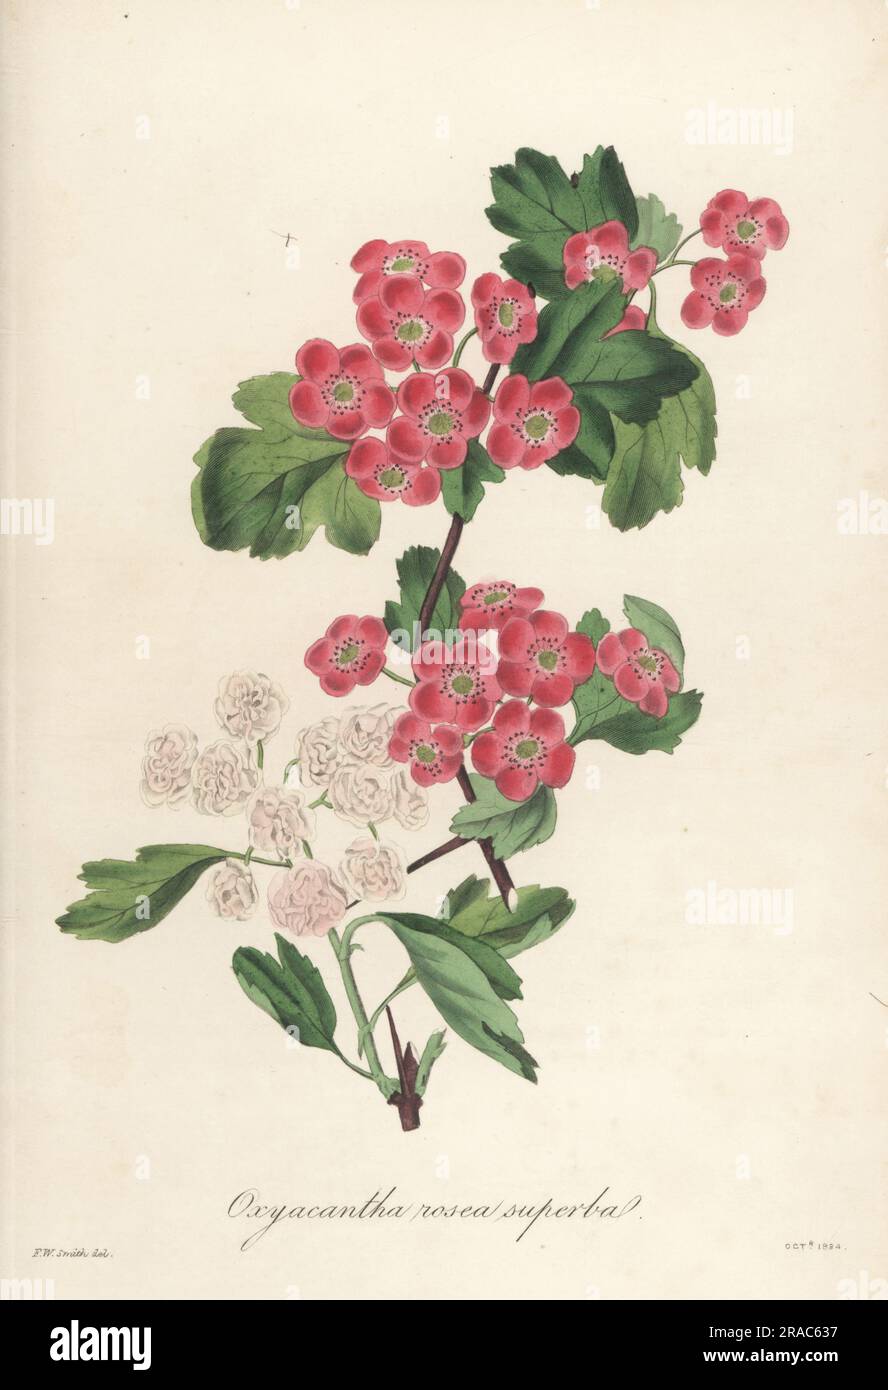 Flowering hawthorn, Oxycantha rosea superba (ambiguous).  Raised by Mr. Malcolm of Kensington Nursery. Deep rose-coloured flowering hawthorn, Crataegus oxyacantha var. rosea. Handcoloured engraving after a botanical illustration by Frederick William Smith from Joseph Paxton’s Magazine of Botany, and Register of Flowering Plants, Volume 1, Orr and Smith, London, 1834. Stock Photo